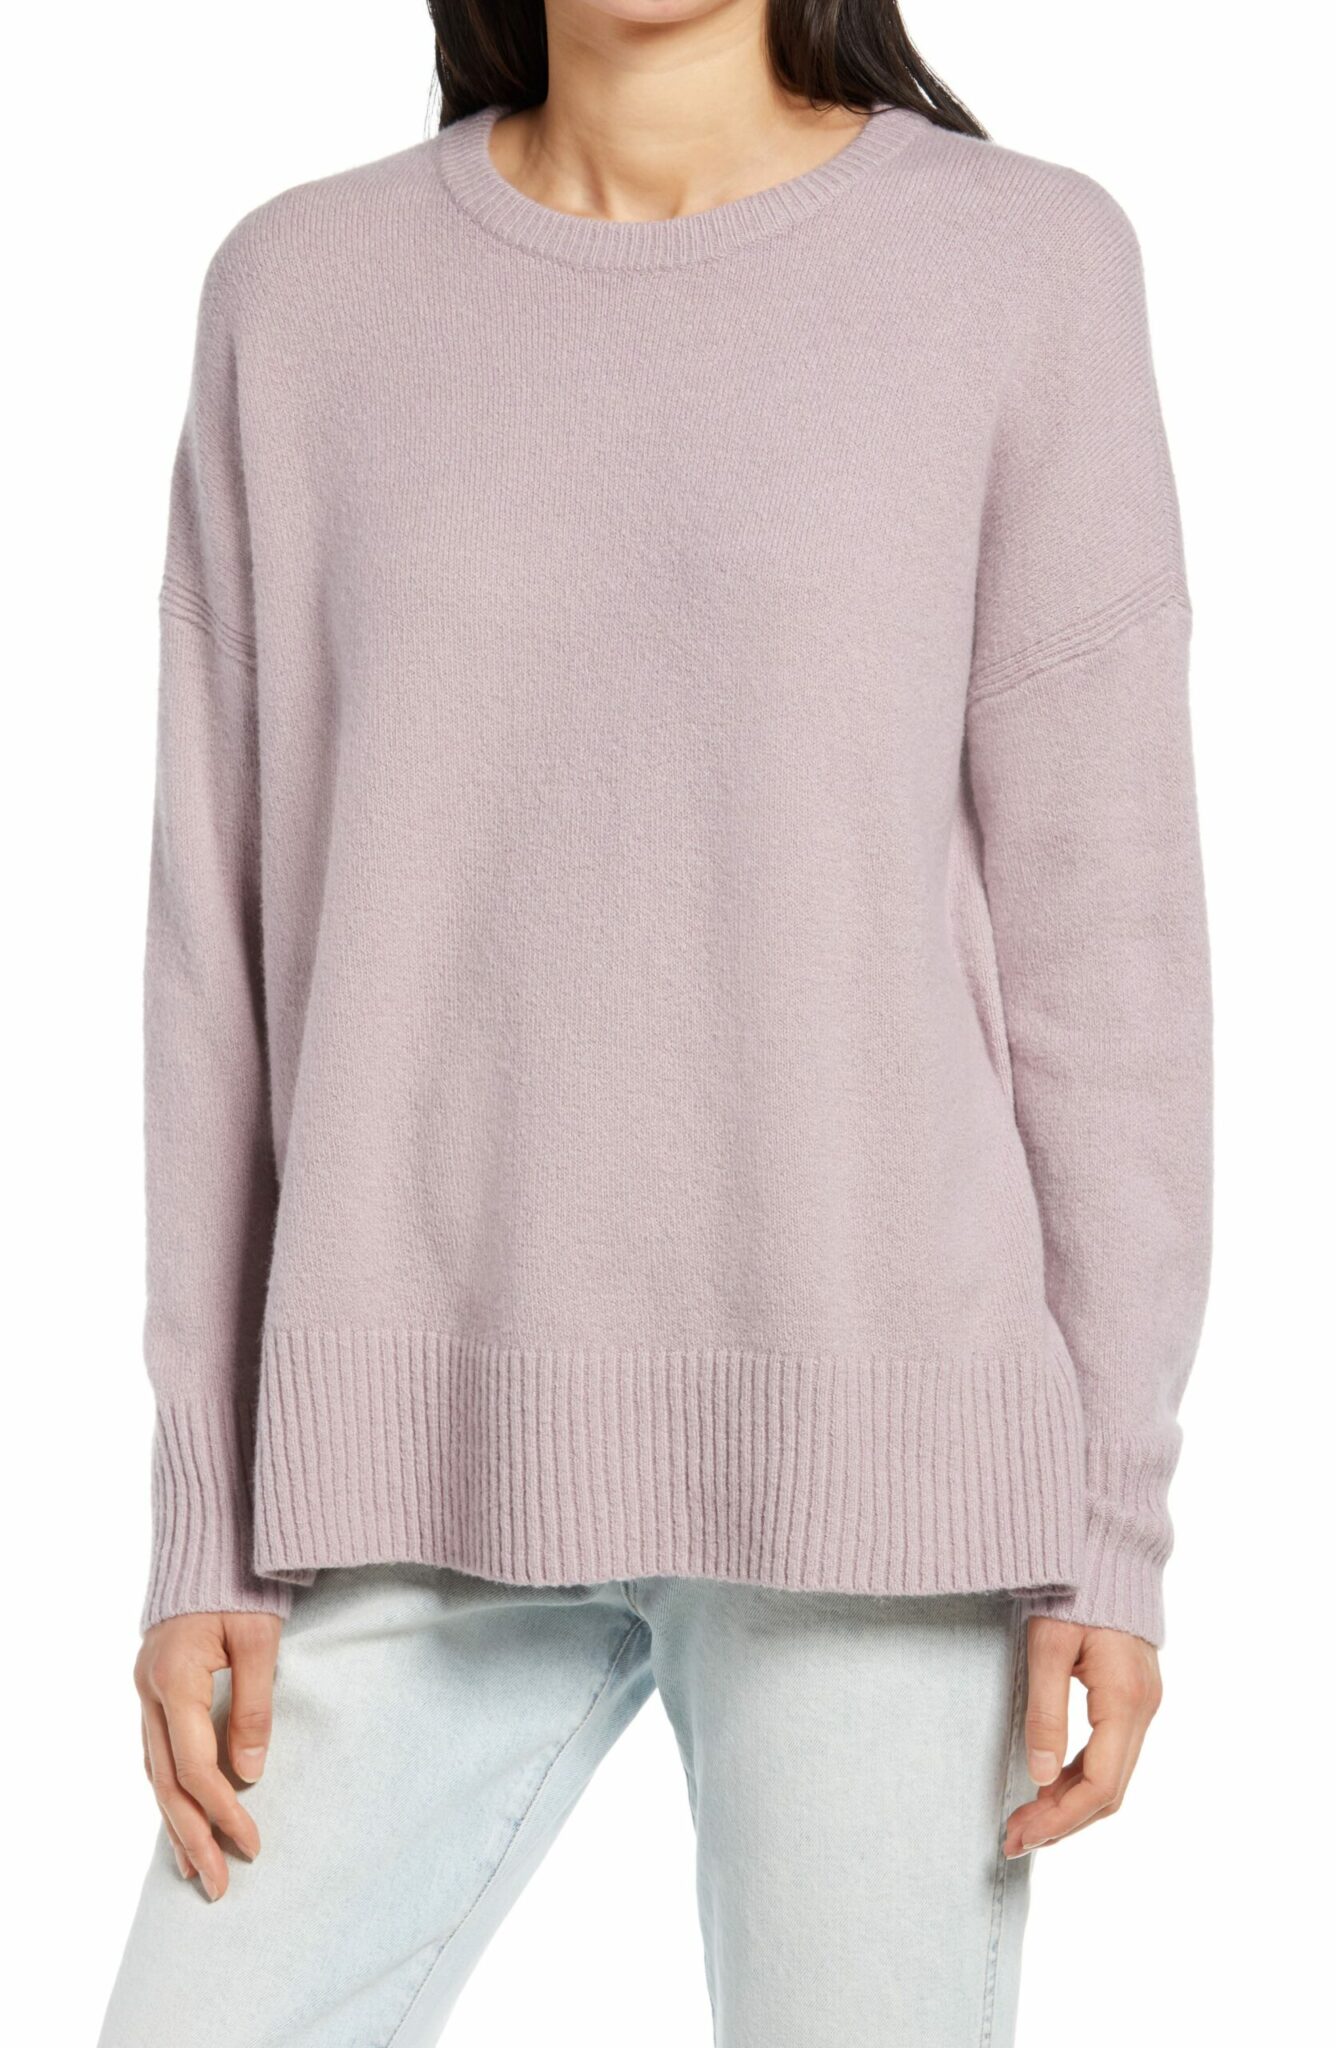 21 Cool Sweaters For Transitional Weather On Nordstrom